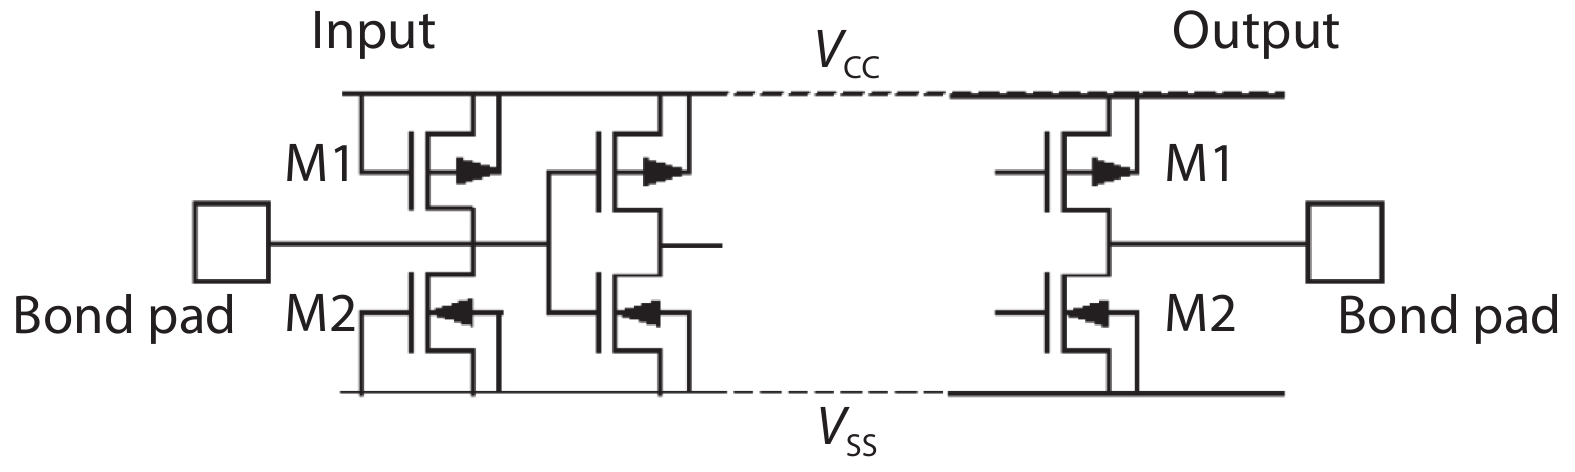 CMOS input and output ESD protection circuit.